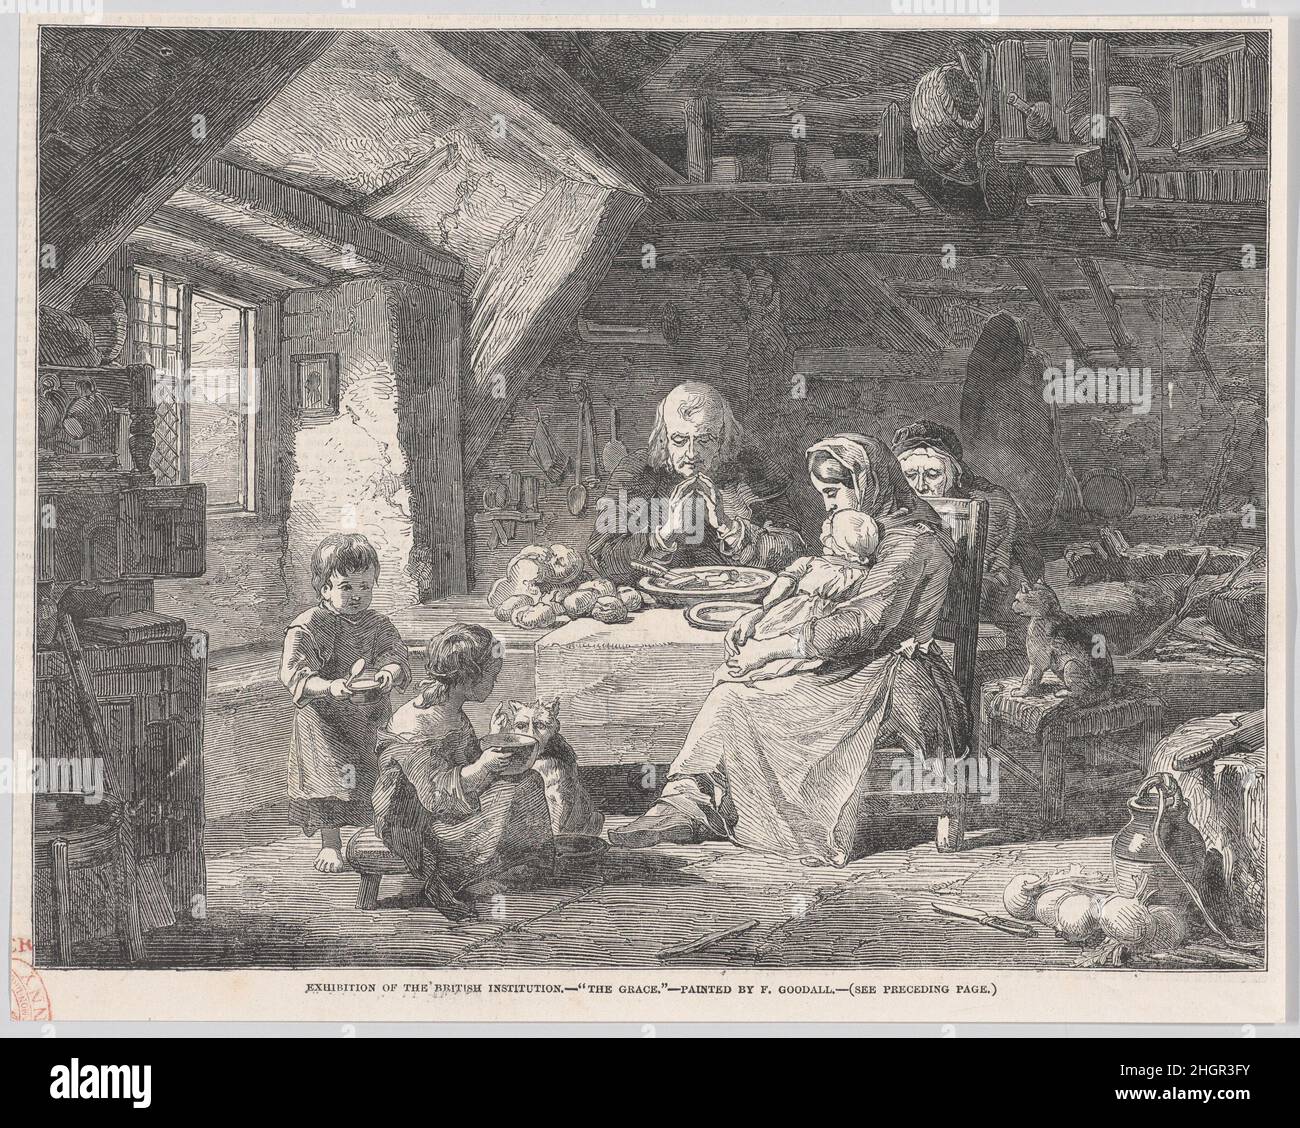 The Grace, from 'Illustrated London News' June 14, 1851 After Frederick Goodall As a family gathers to eat in a humble room, a grandfather blesses the food next to his wife, as a younger woman holds a baby in her lap, and two children sit quietly in the foregound. Thomas's wood engraving reproduces a painting by Frederick Goodall, the second son of the skilled line engraver Edward Goodall. As a child, Frederick and his siblings had been encouraged to pursue art by John Ruskin, Clarkson Stanfield, David Roberts, and J.M.W. Turner. At sixteen, Goodall showed four commissioned watercolors at the Stock Photo